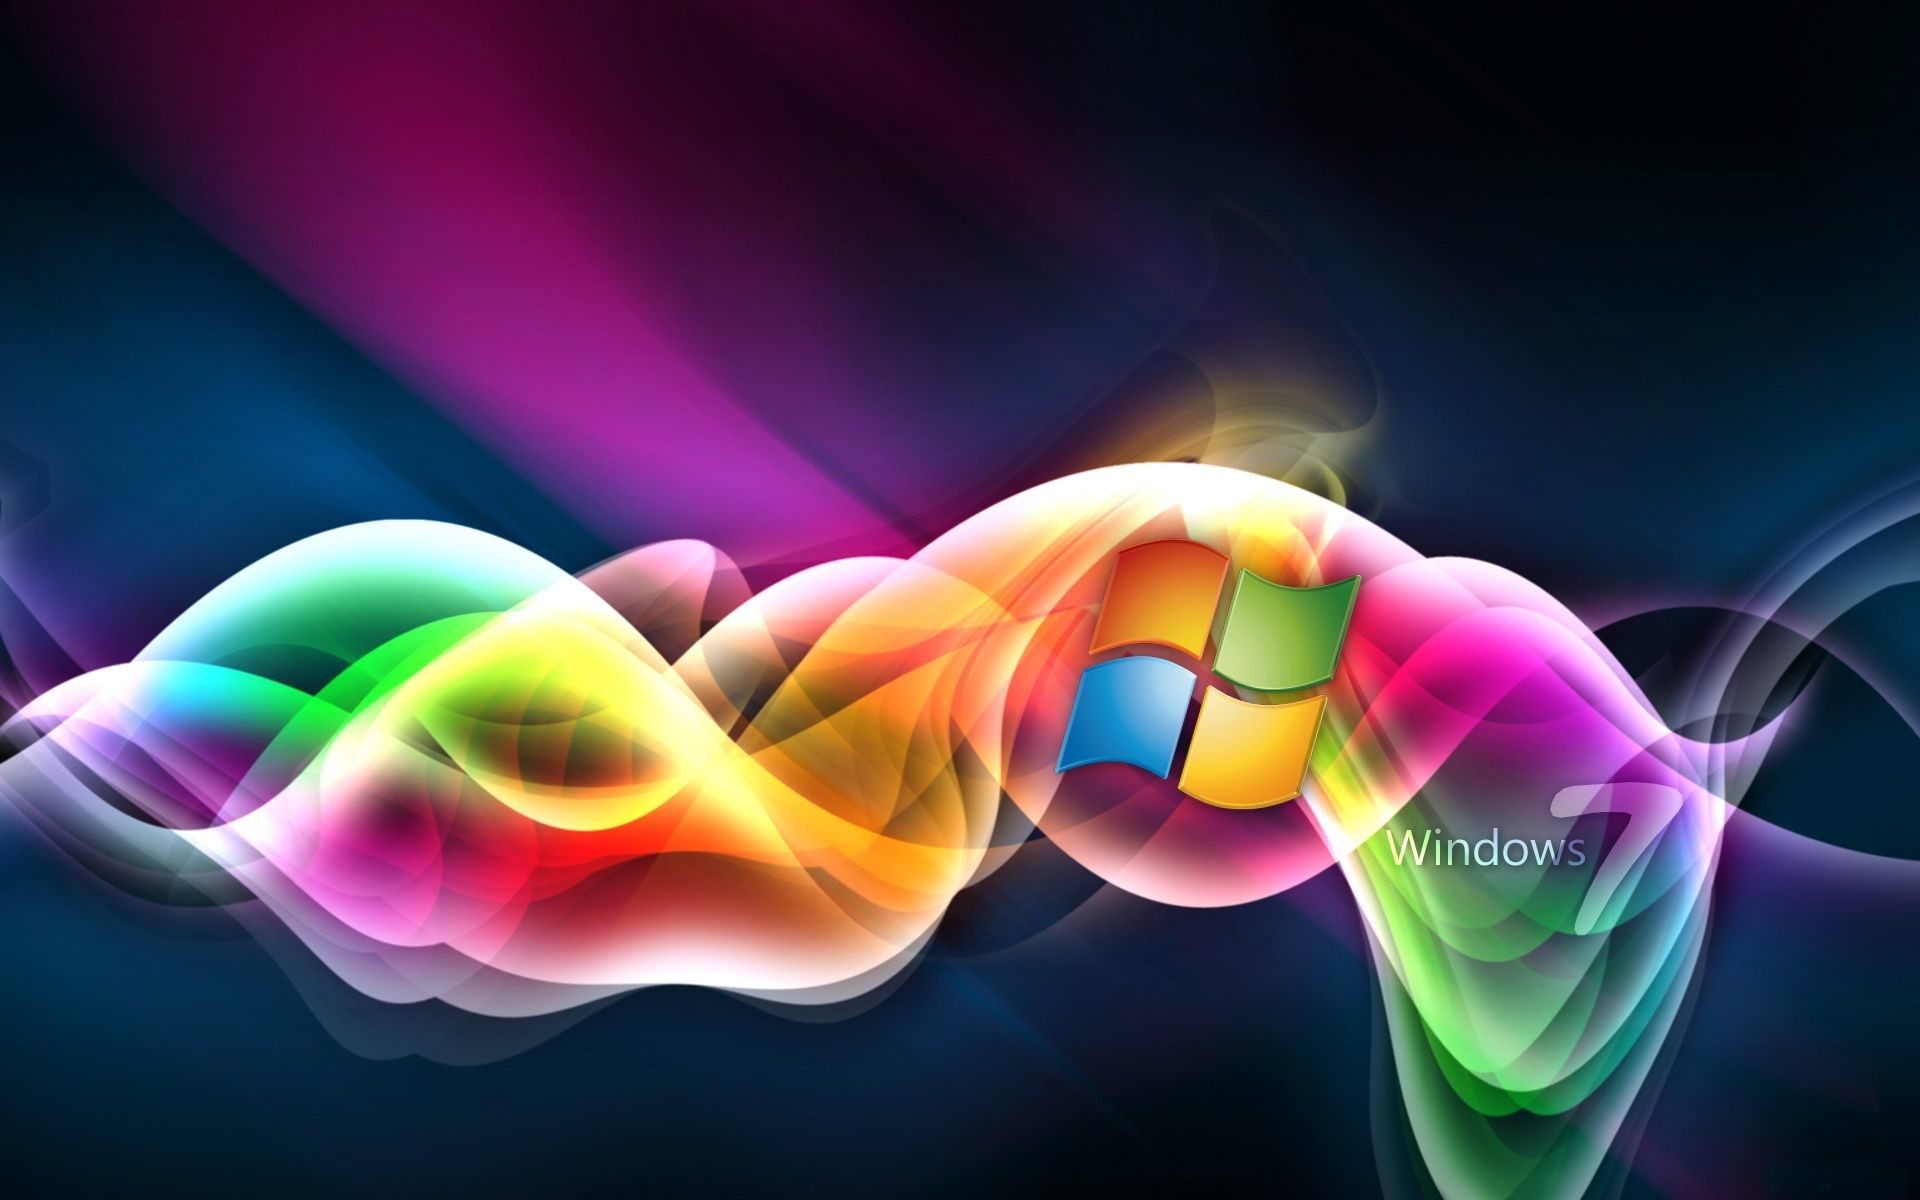 15 Best Windows 11 Themes, Backgrounds & Skins Download Free 2023